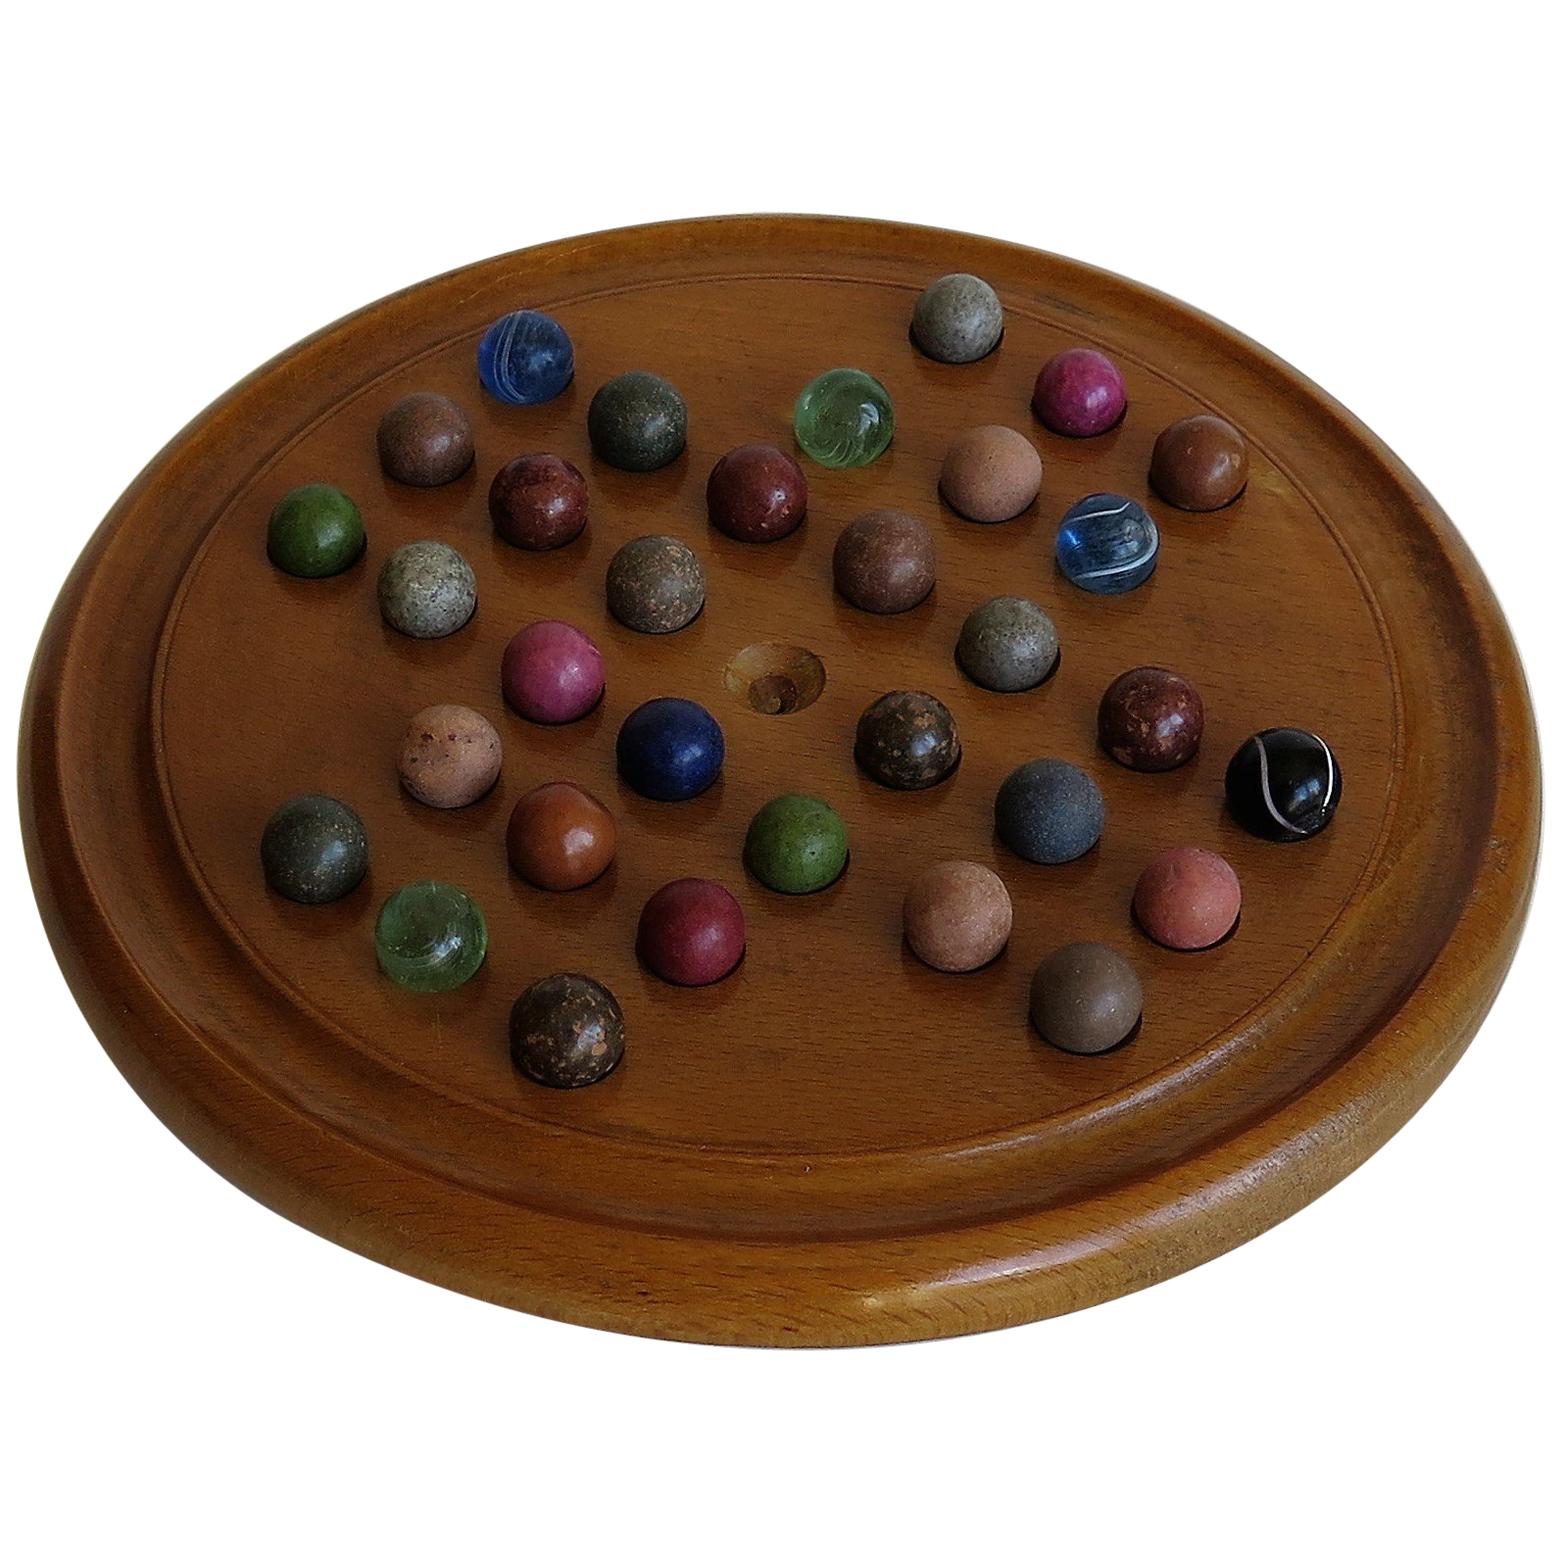 19th Century Marble Solitaire Board Game, with 32 Handmade Marbles, circa 1880